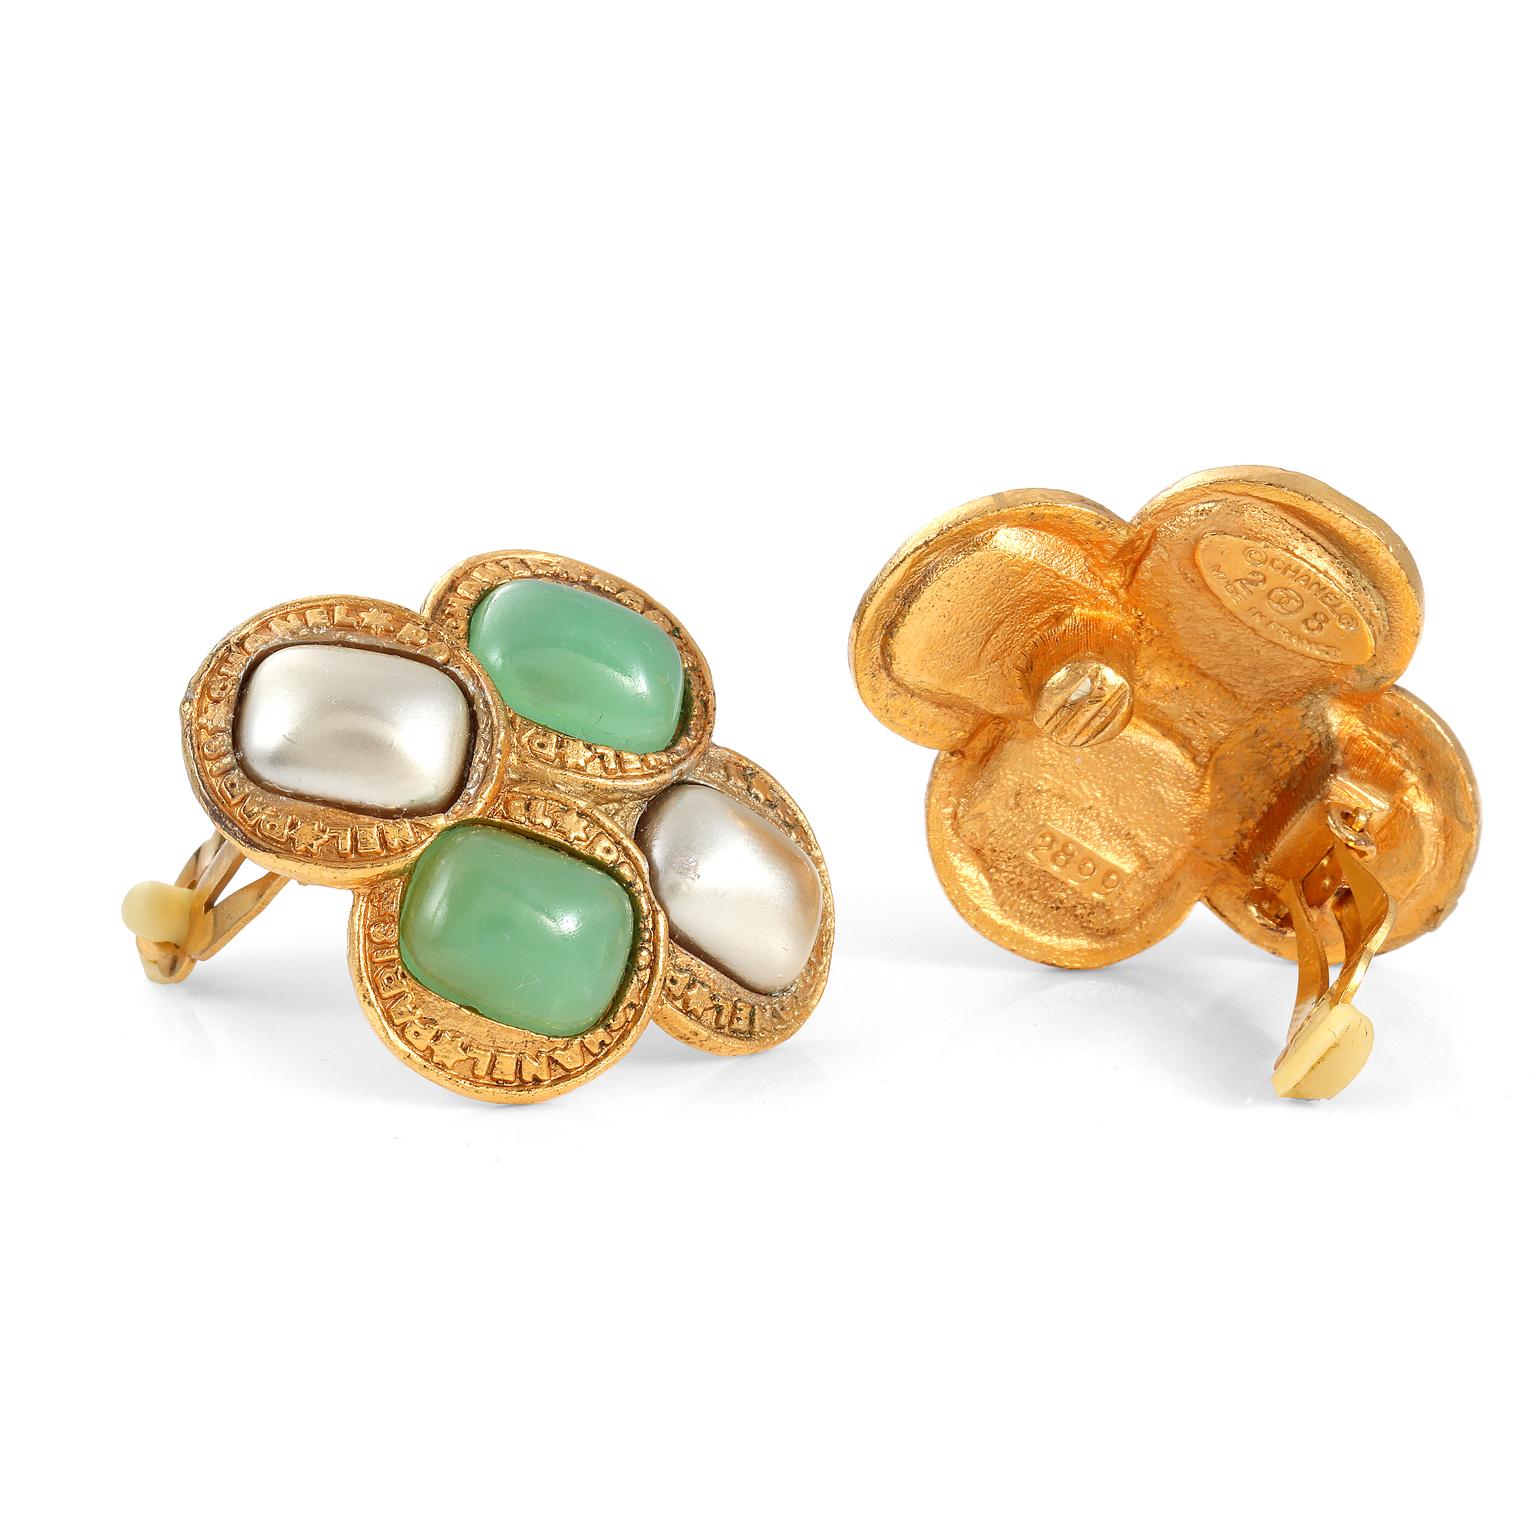 These authentic Chanel Green Gripoix and Pearl Earrings are in exceptionally good vintage condition from the late 80’s- early 90’s.  Seafoam green Gripoix glass stones are beautifully complemented by silver toned faux pearls.  Positioned in gold